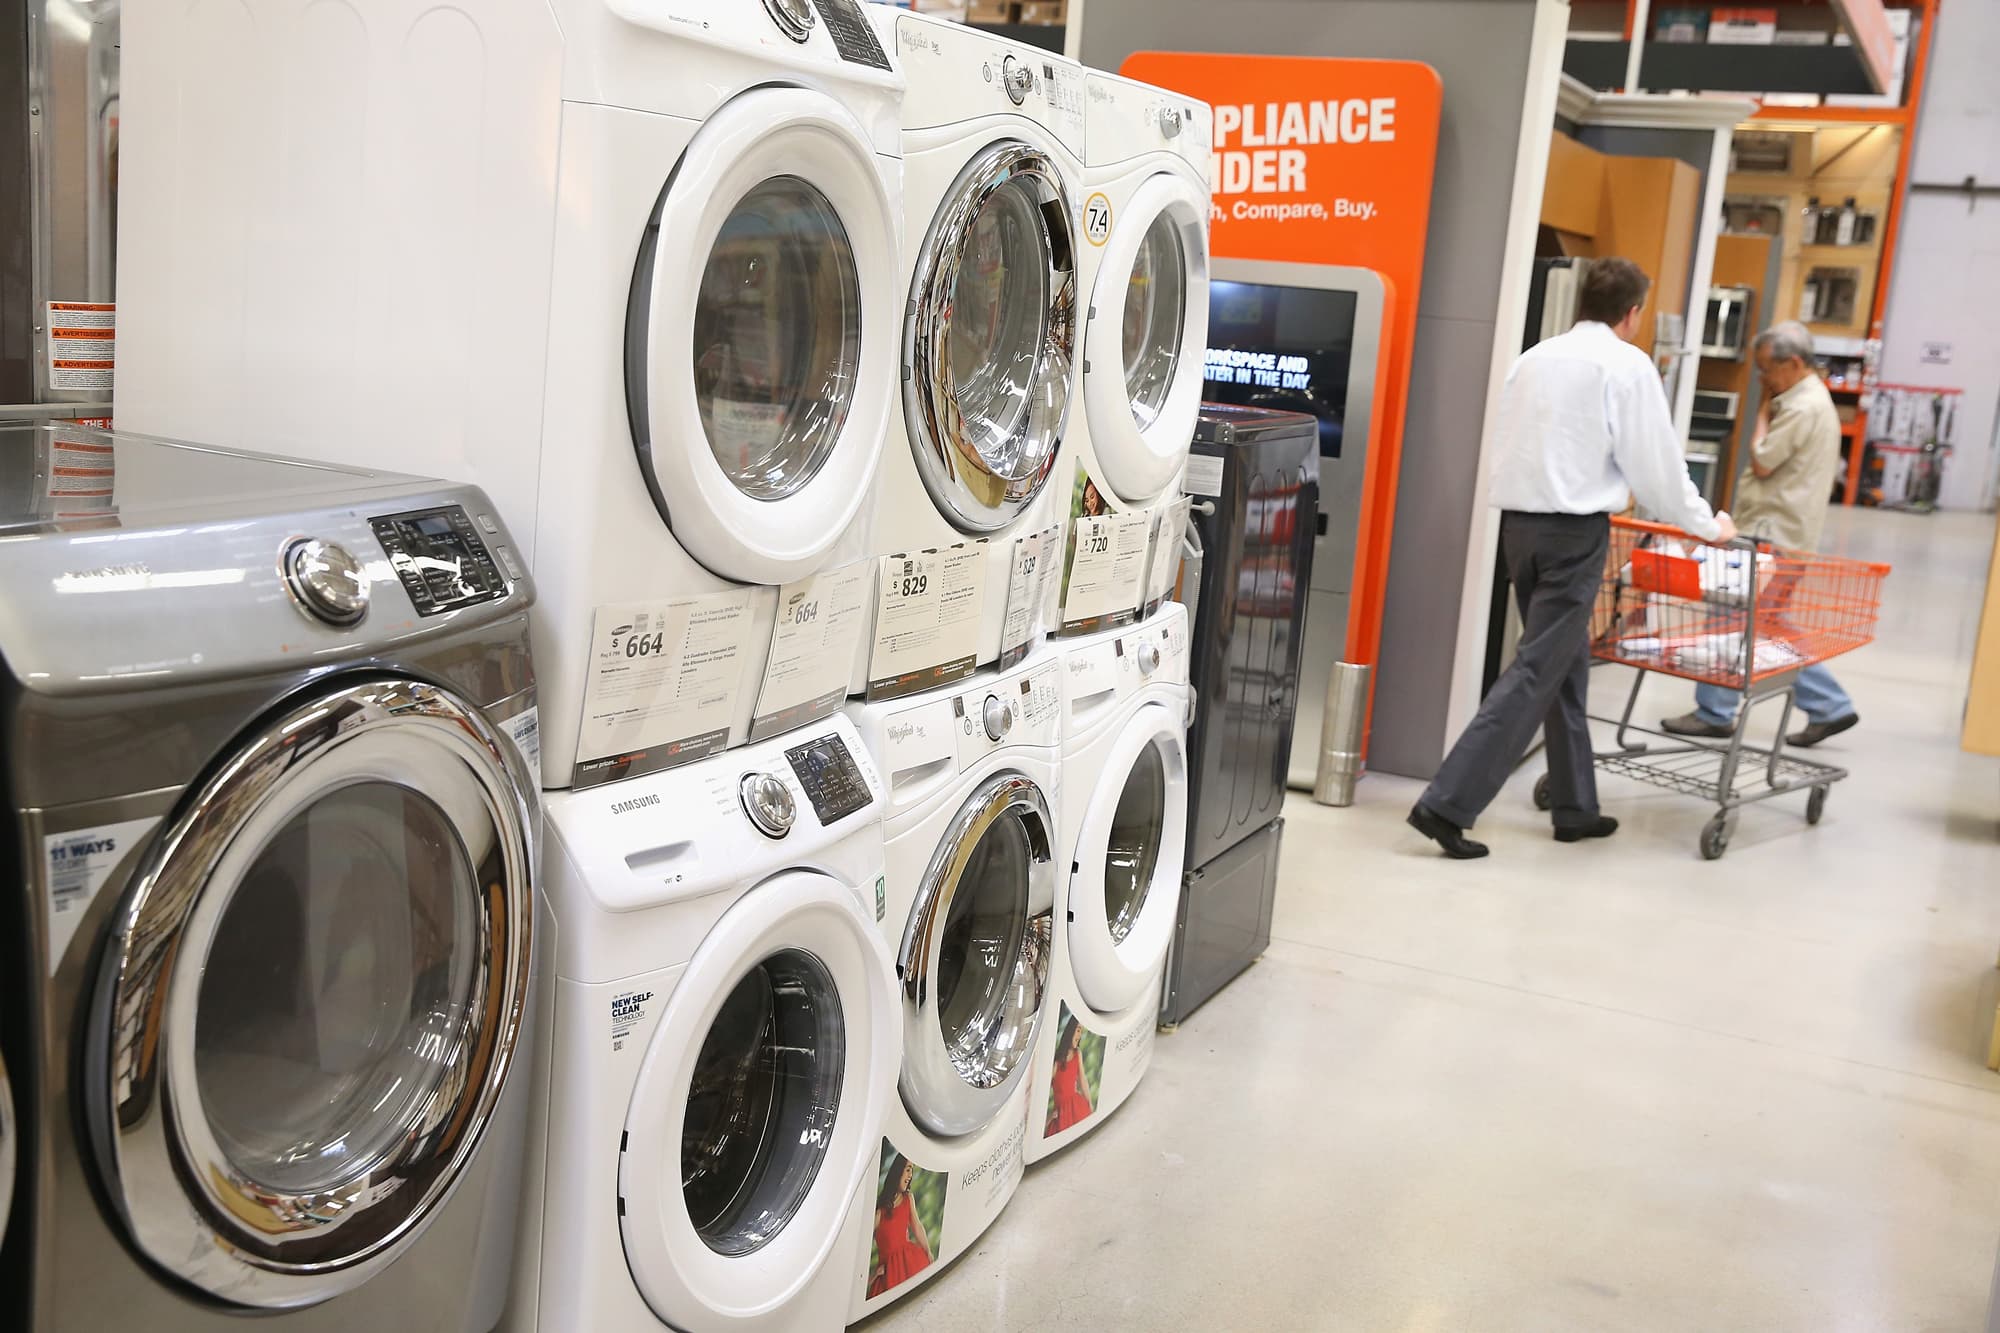 Home Depot Appliance Return Policy